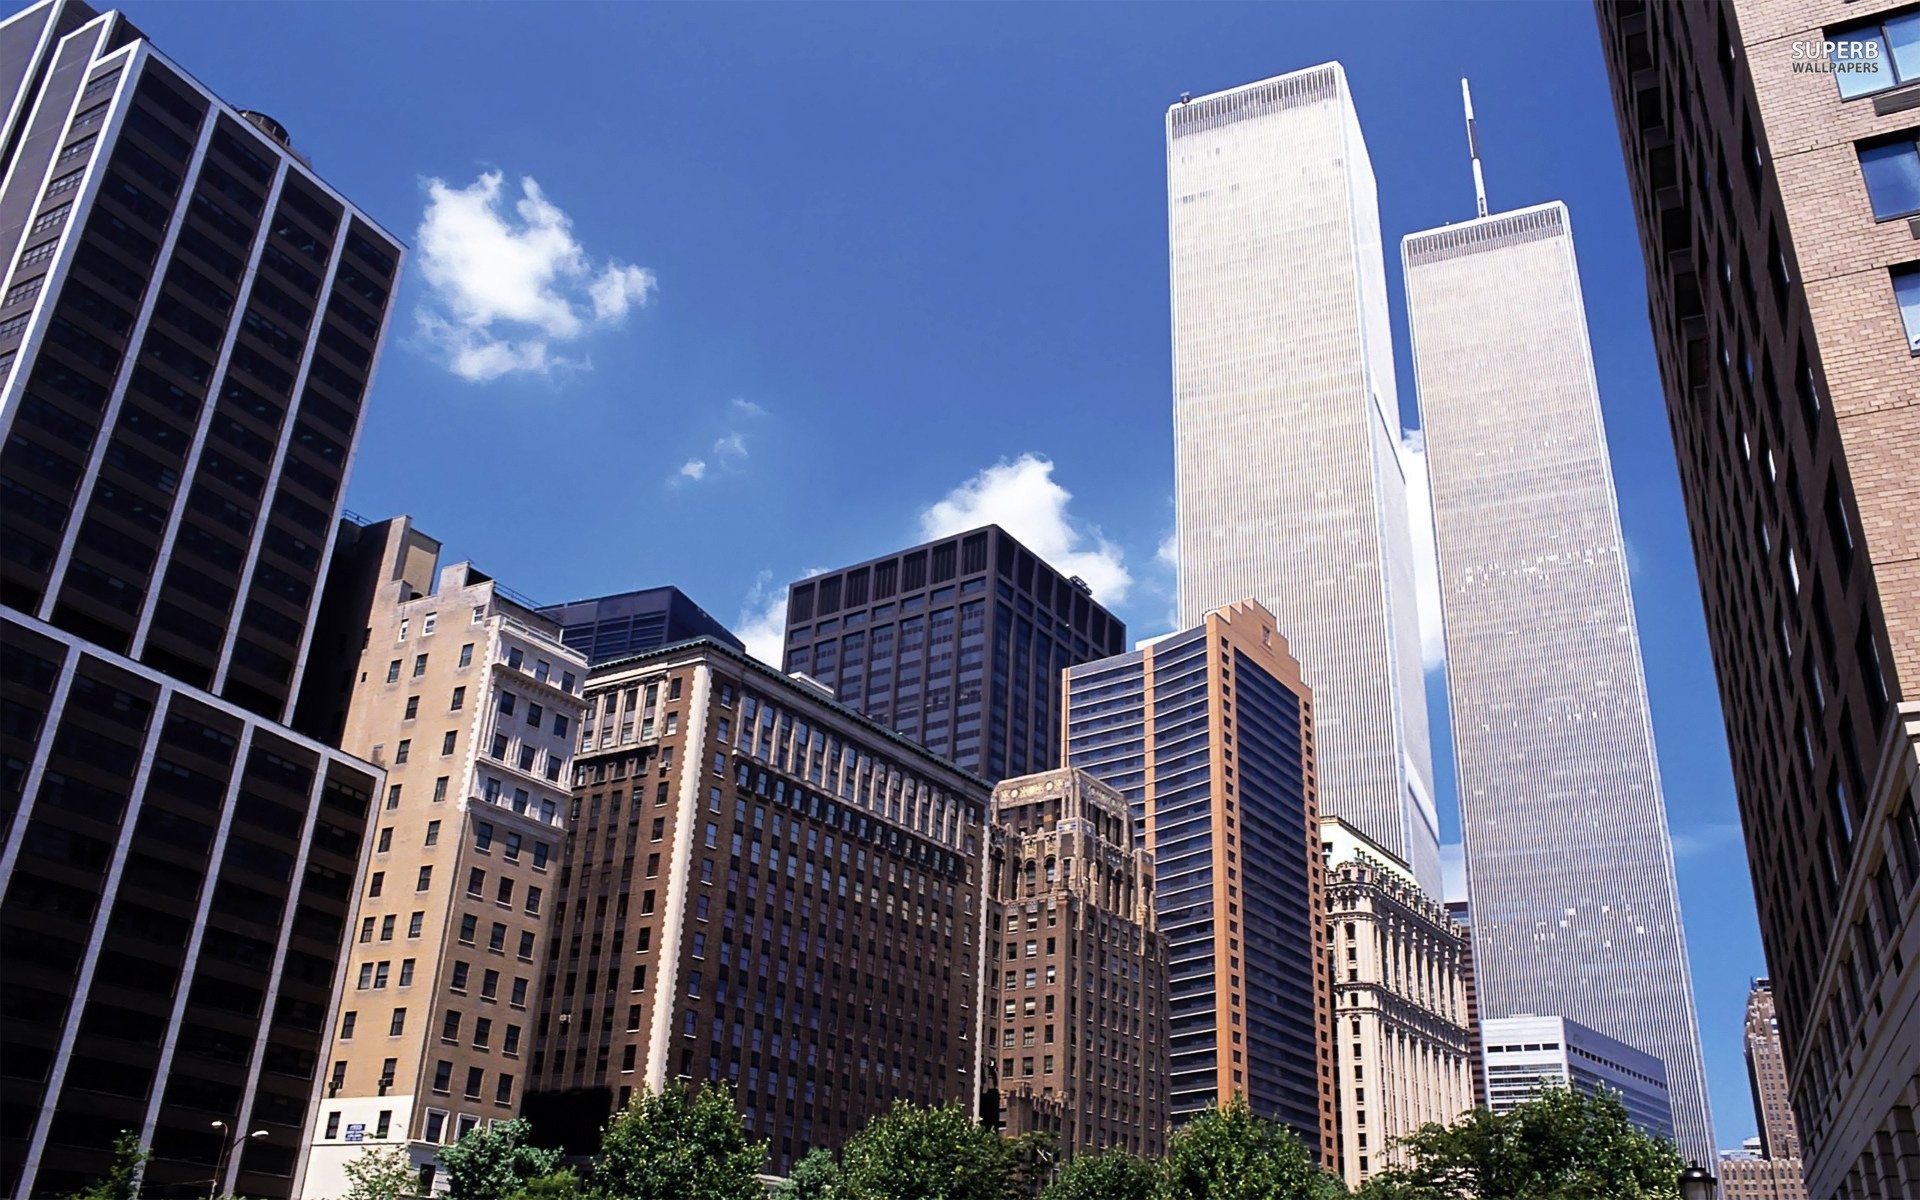 1920x1200 Twin Towers New York City. UPLOAD. TAGS: Big Apple World Trade Center ...